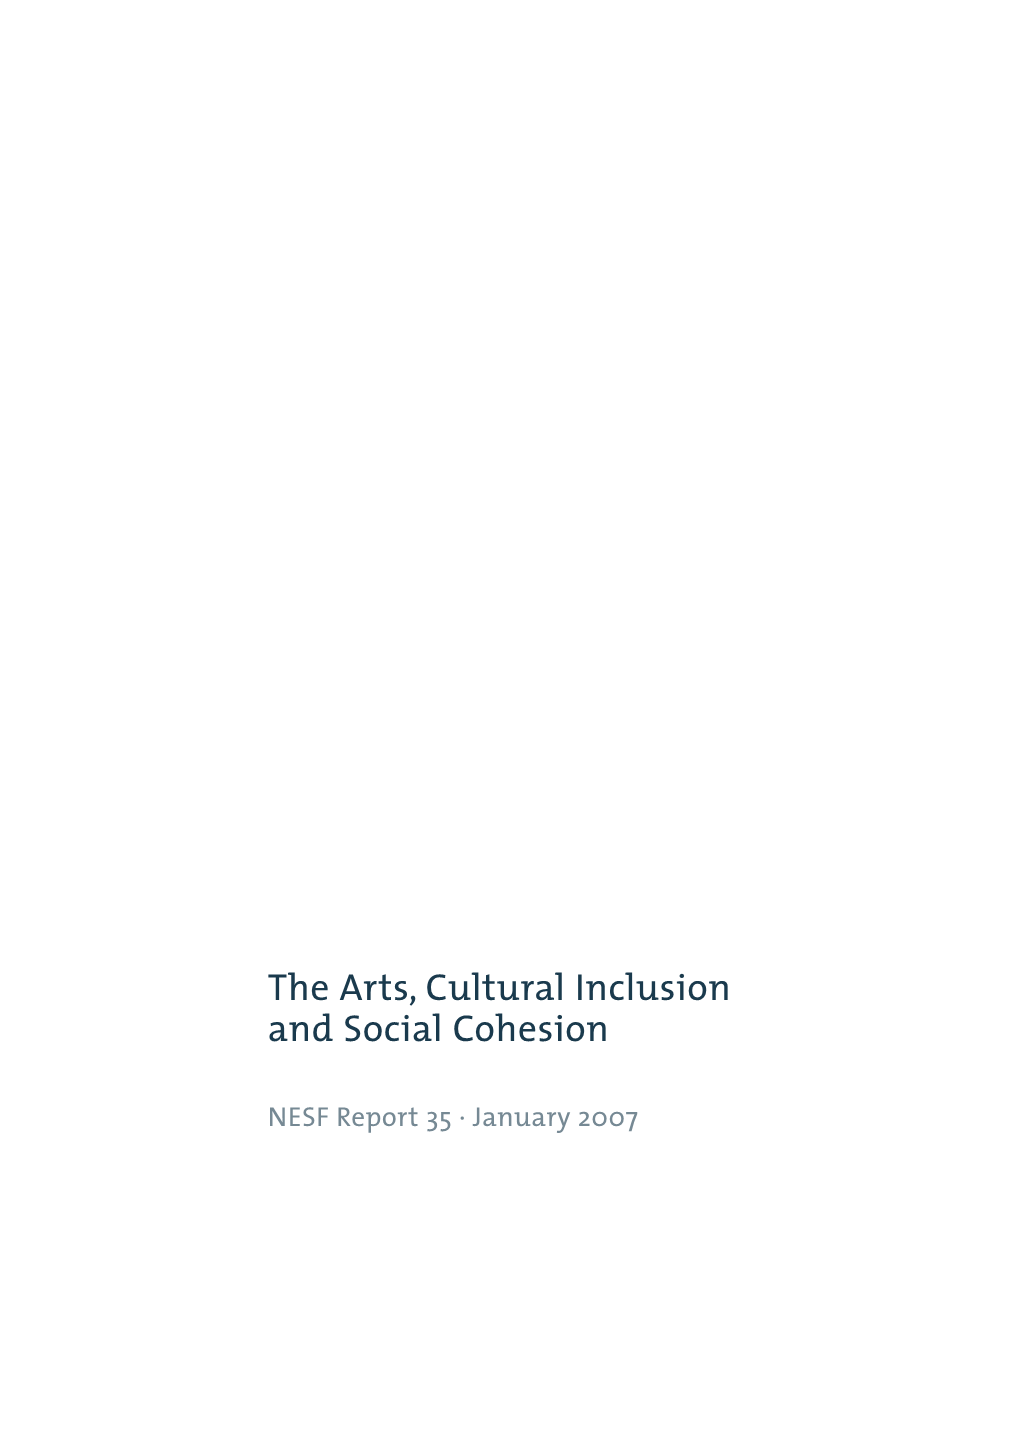 The Arts, Cultural Inclusion, and Social Cohesion